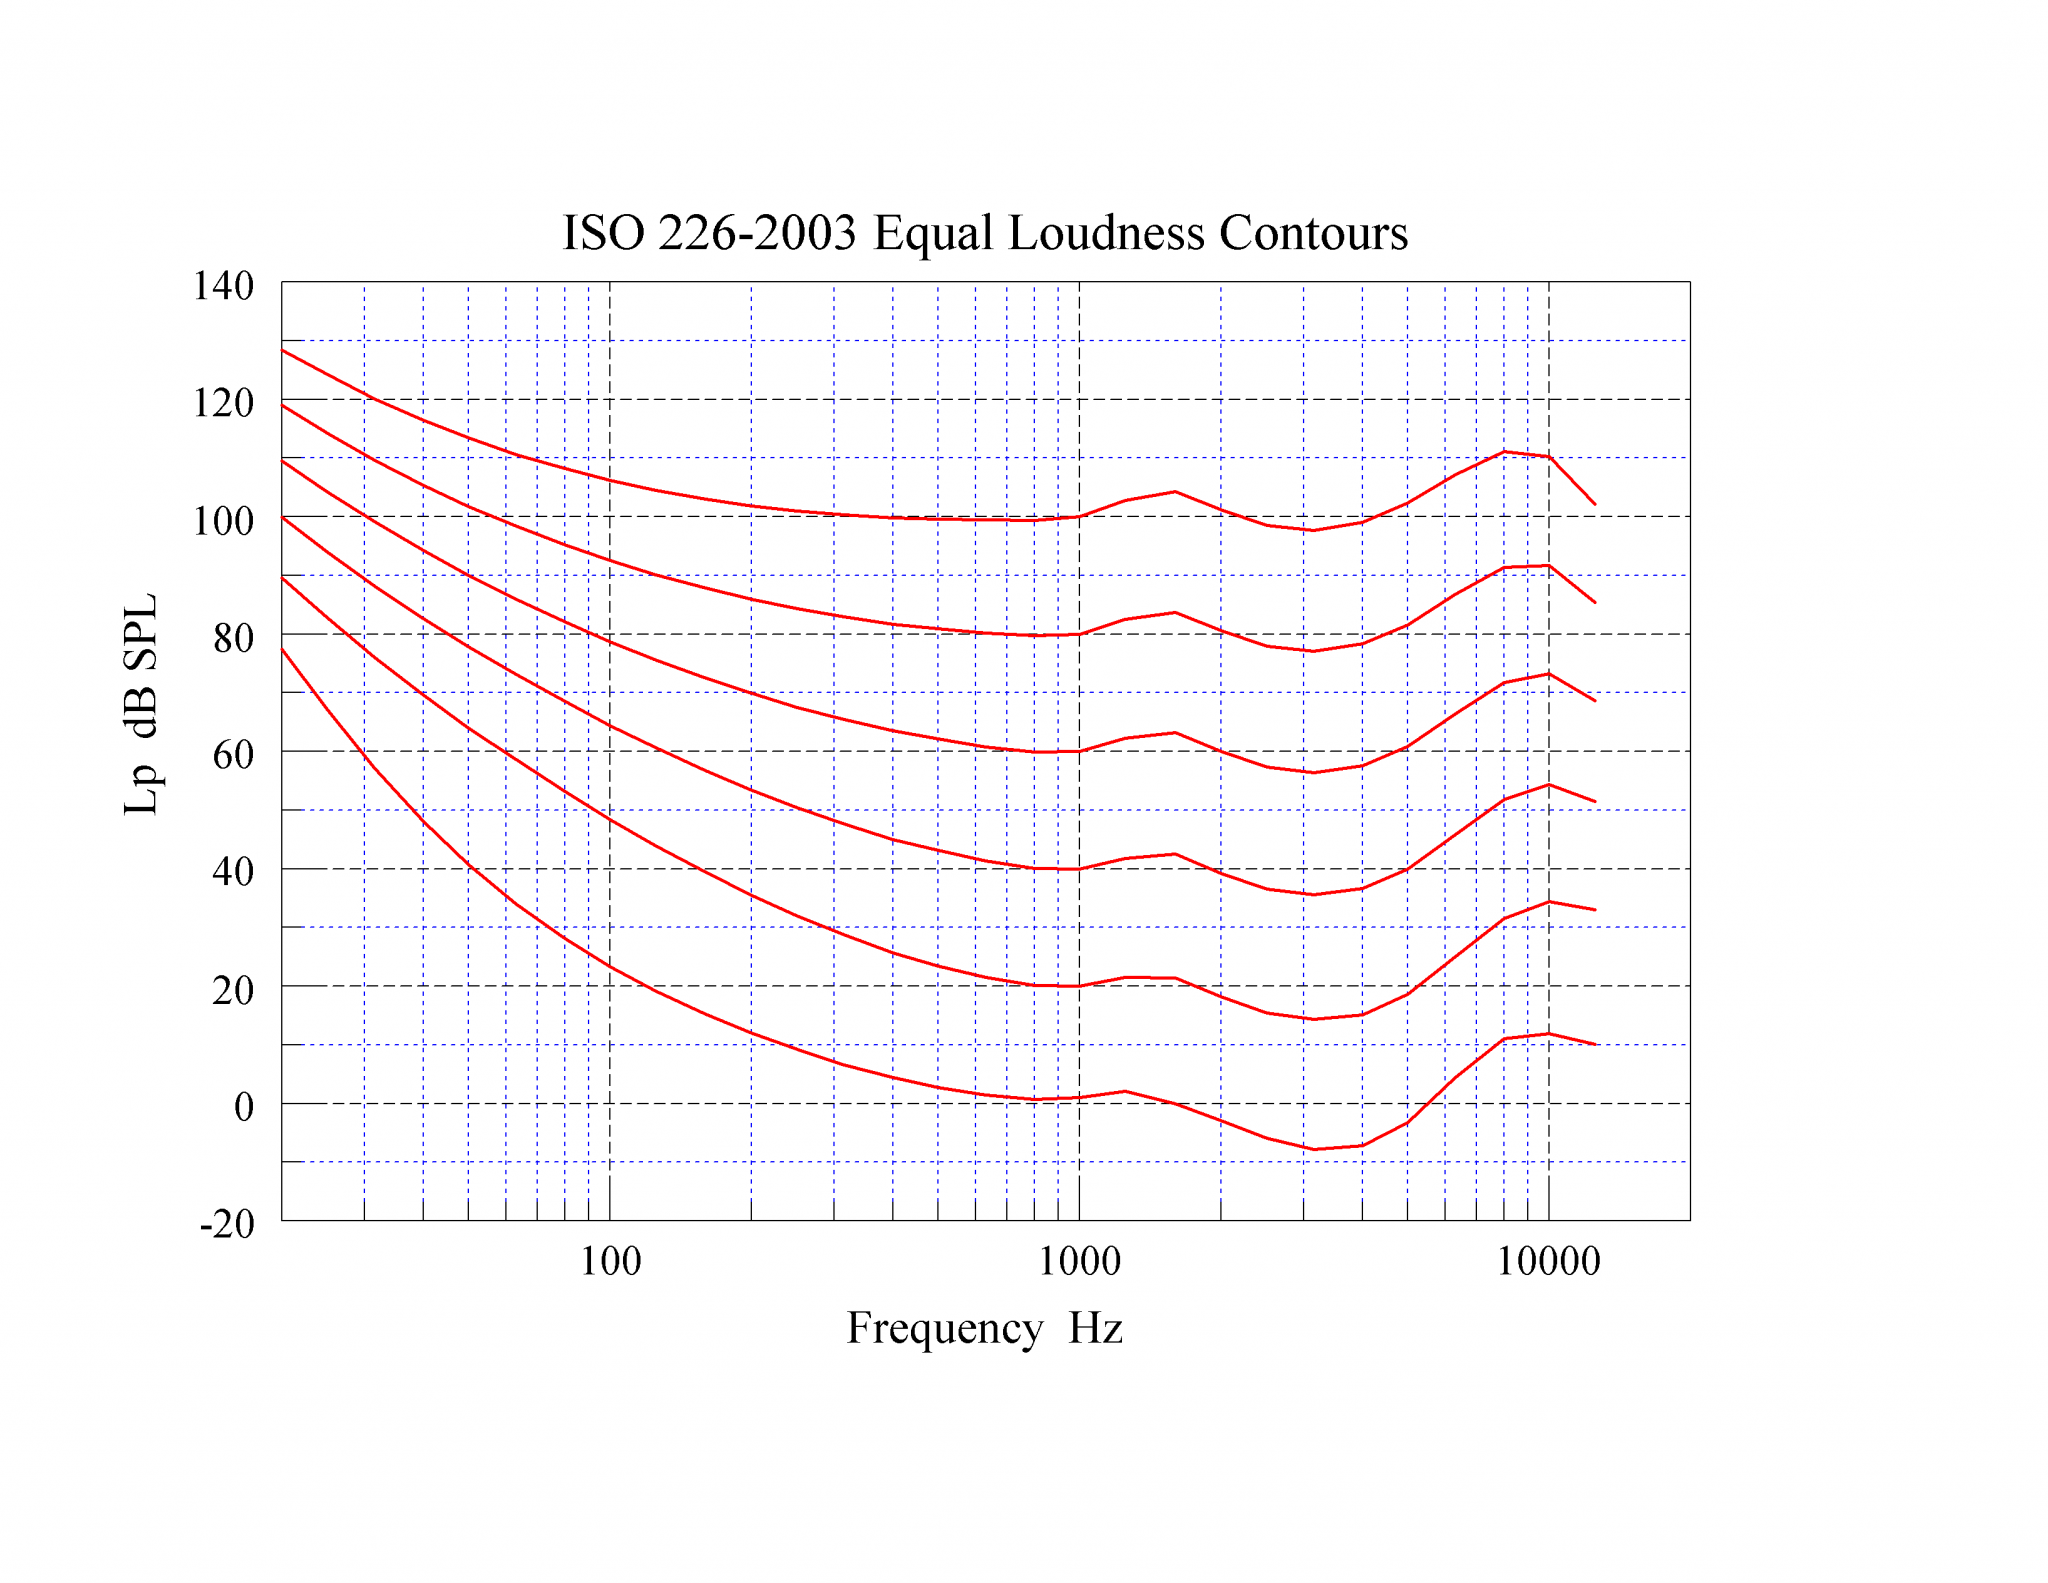 iso226-2003 Equal Loudness Contours v2.png